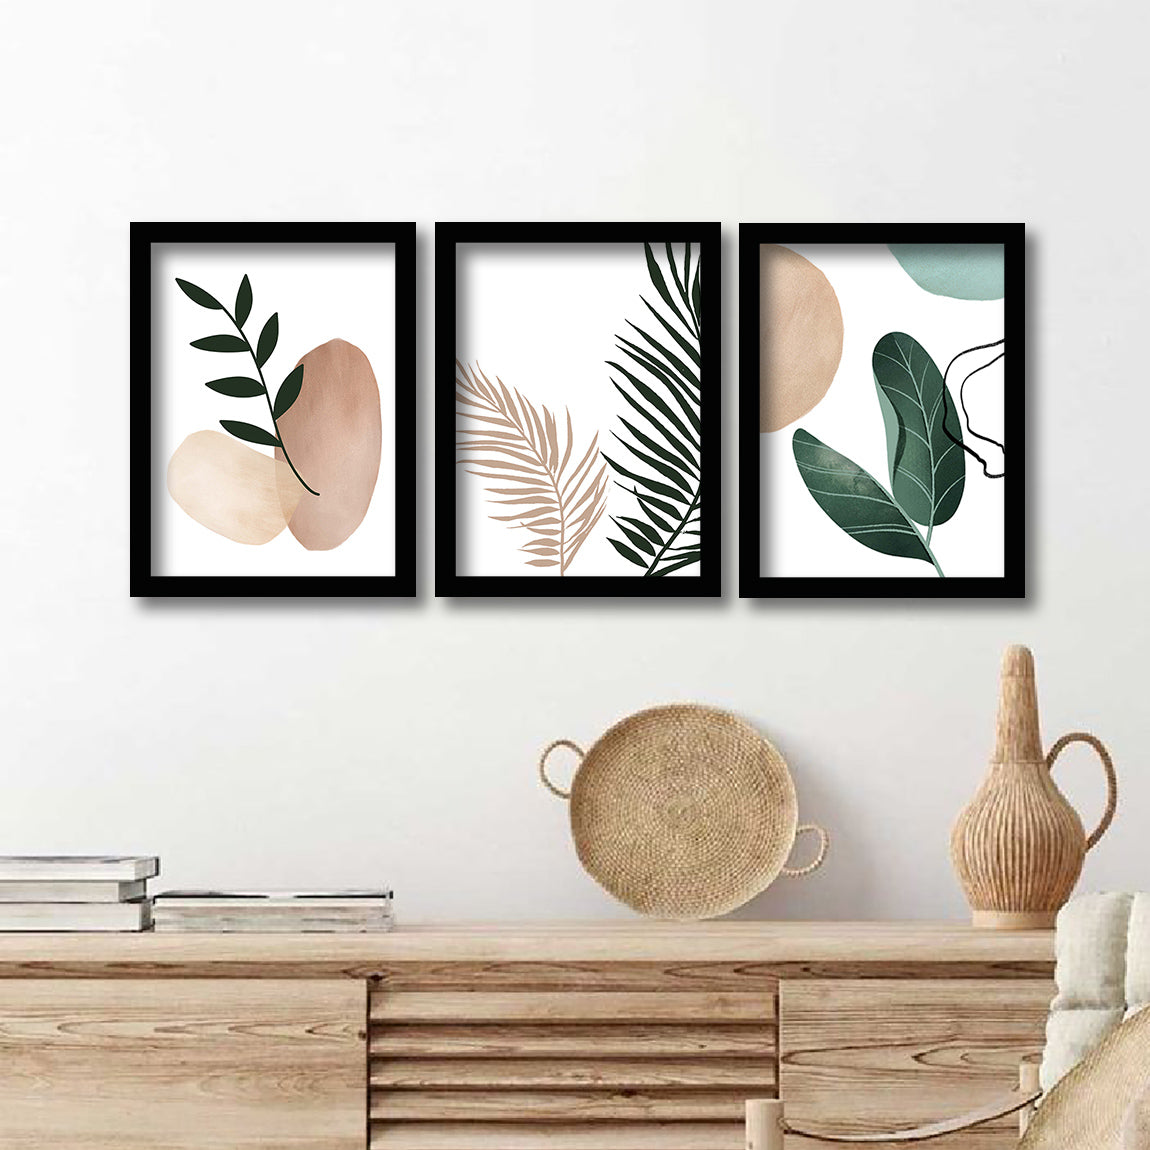 Wall Decor Modern Art Framed Wall Painting Poster for Living room Bedroom Office Gifts Home Decoration Frame In Beige (Set of 3) 11x14 Inches